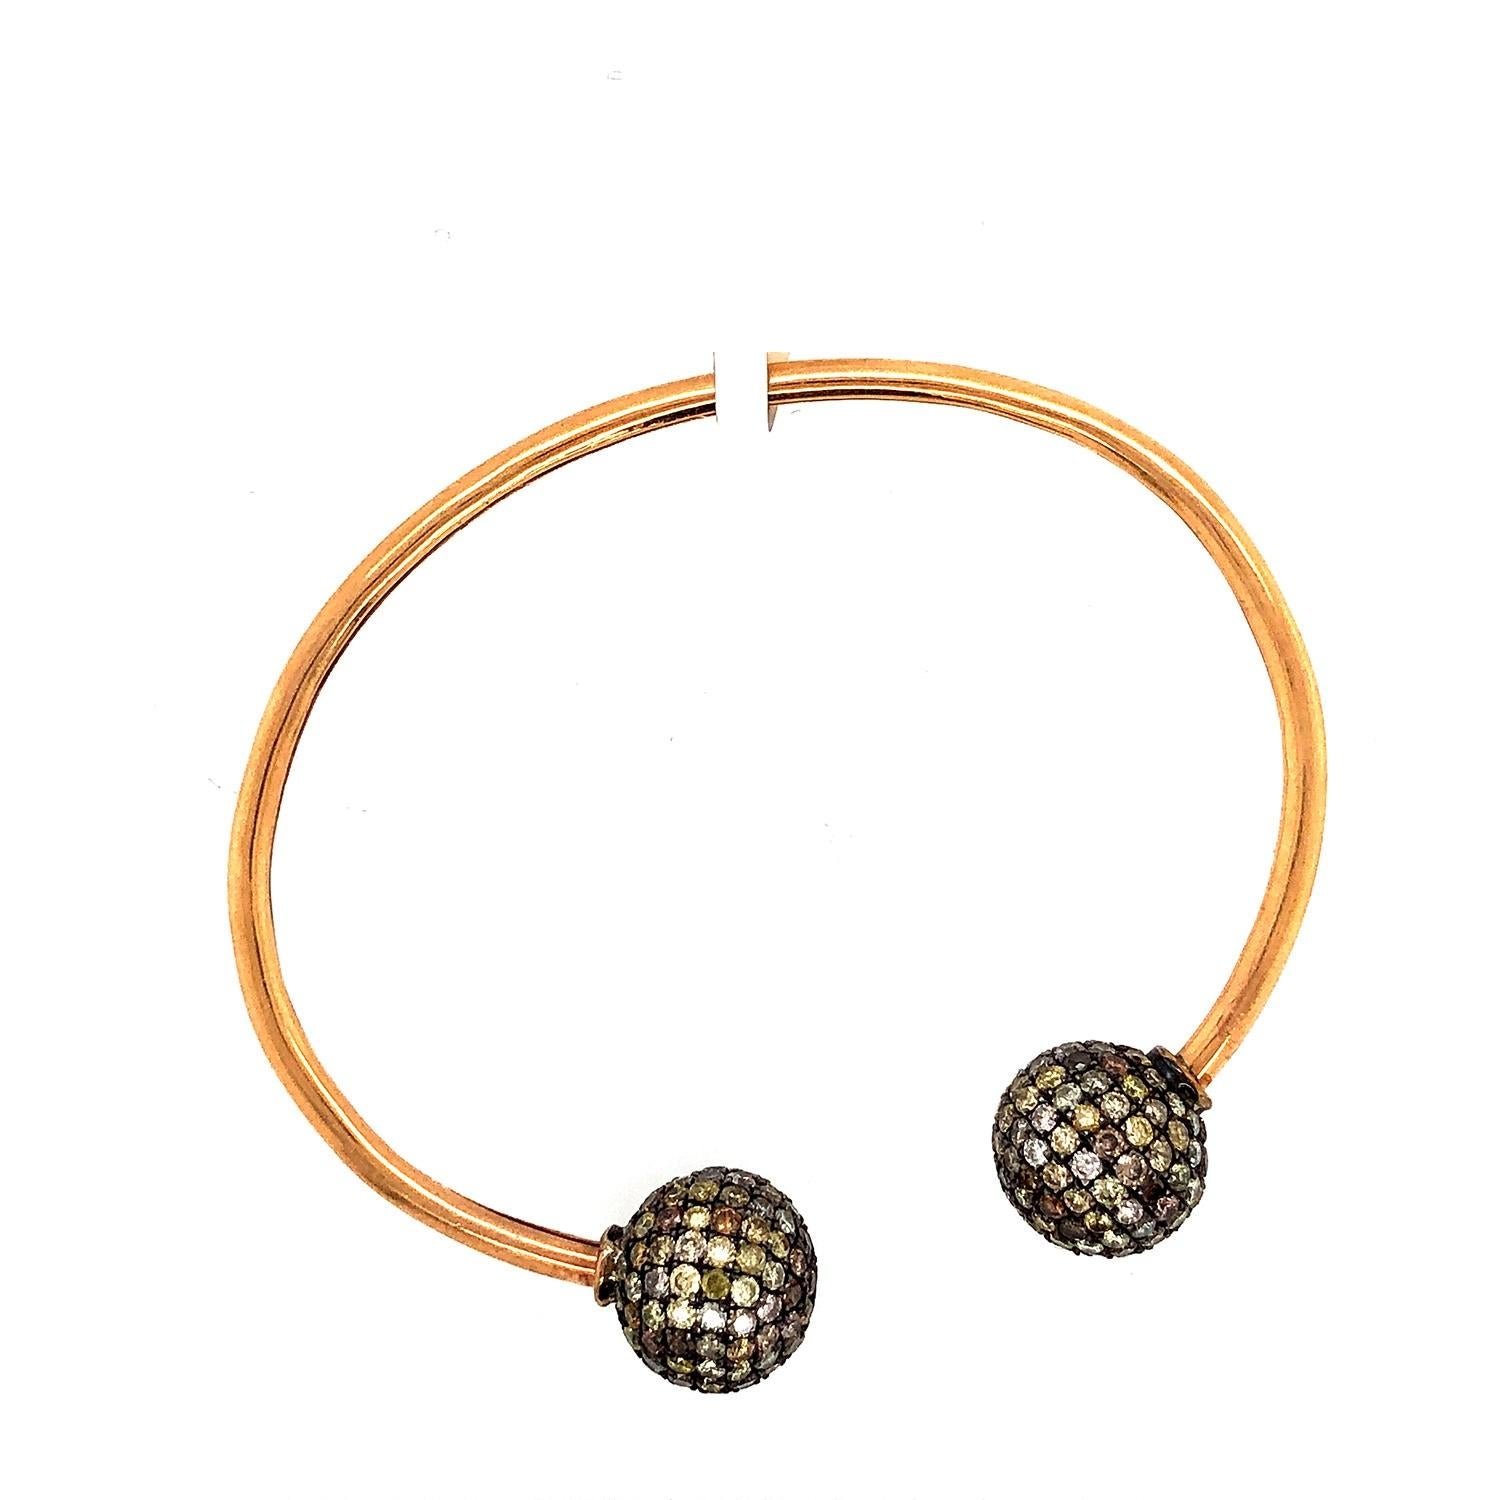 gold bangle with balls on end